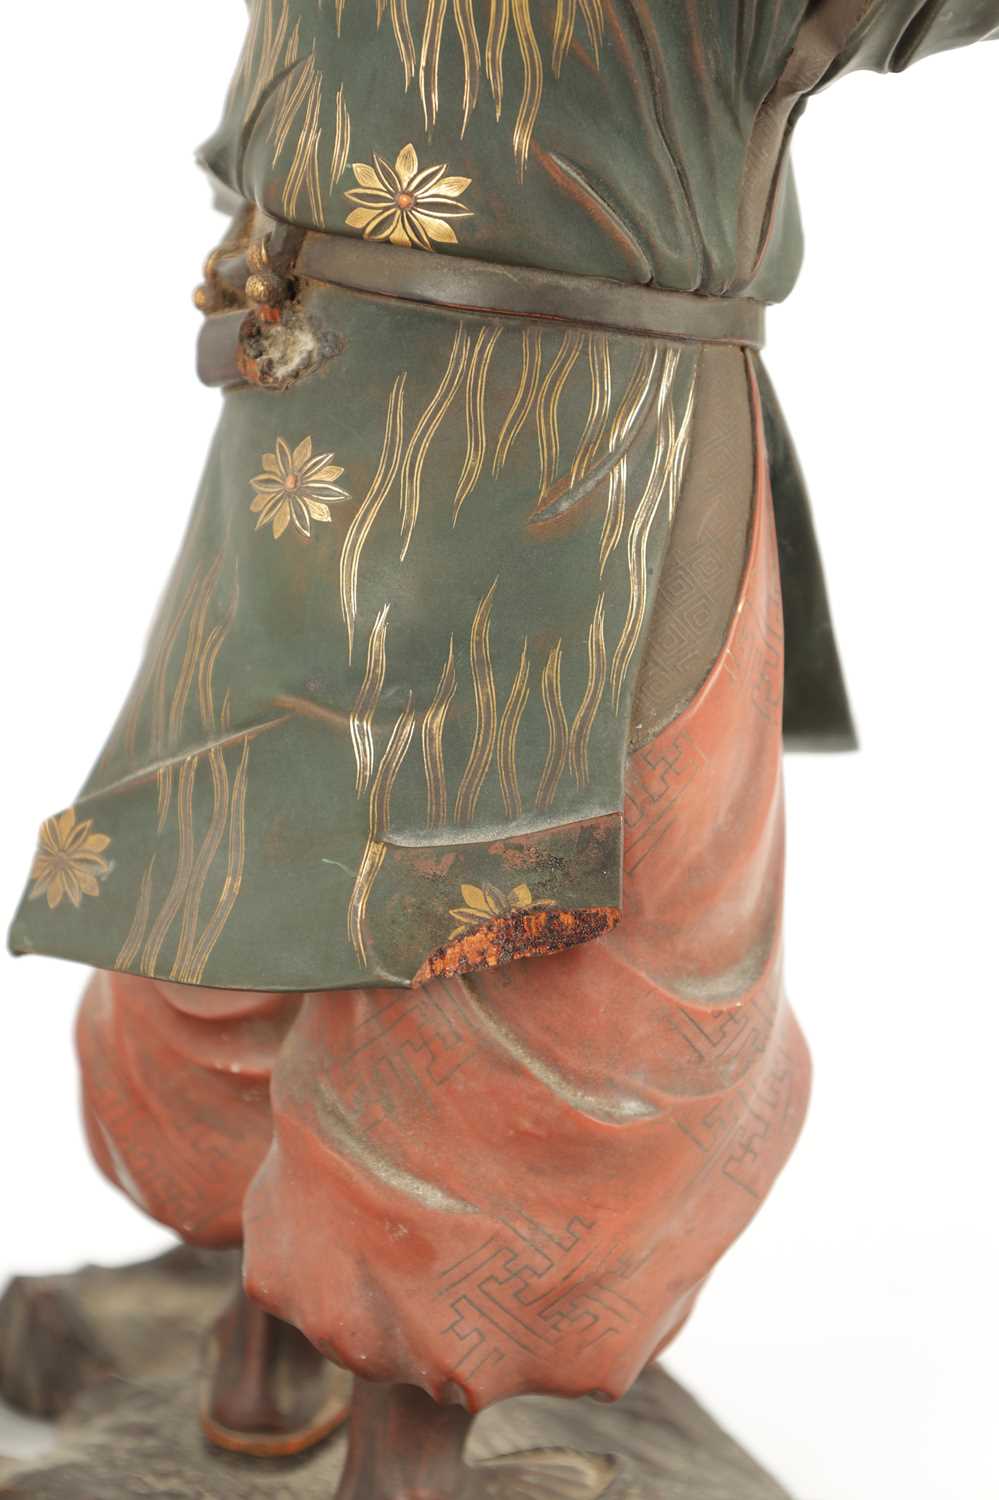 A LARGE MEIJI PERIOD JAPANESE CARVED LACQUERED SCULPTURE - Image 9 of 10